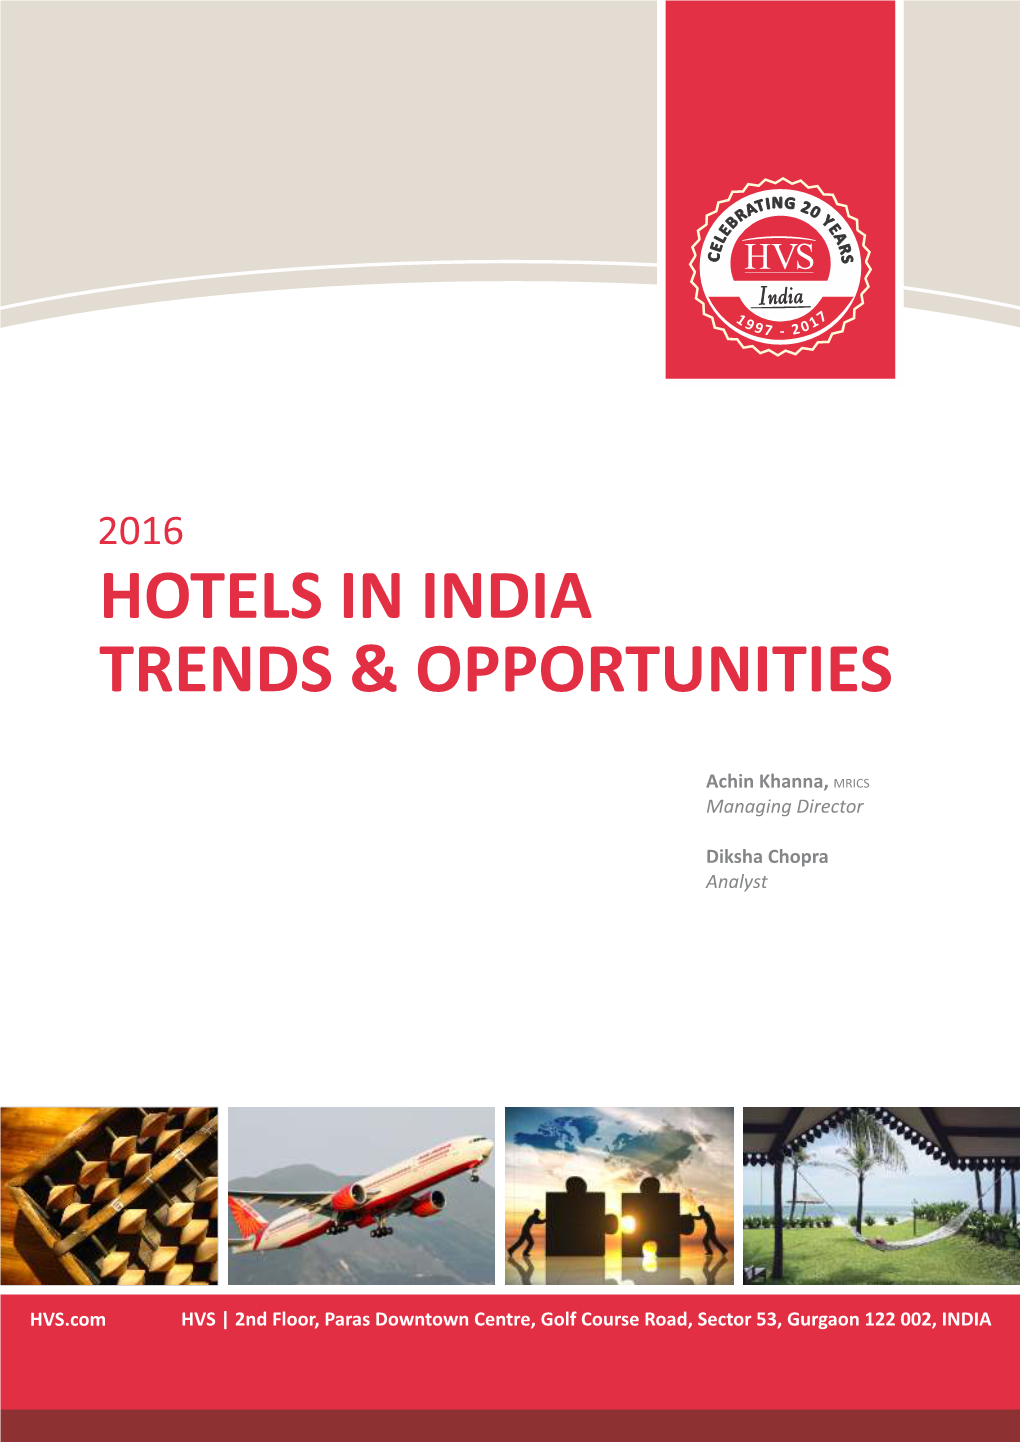 Hotels in India Trends & Opportunities